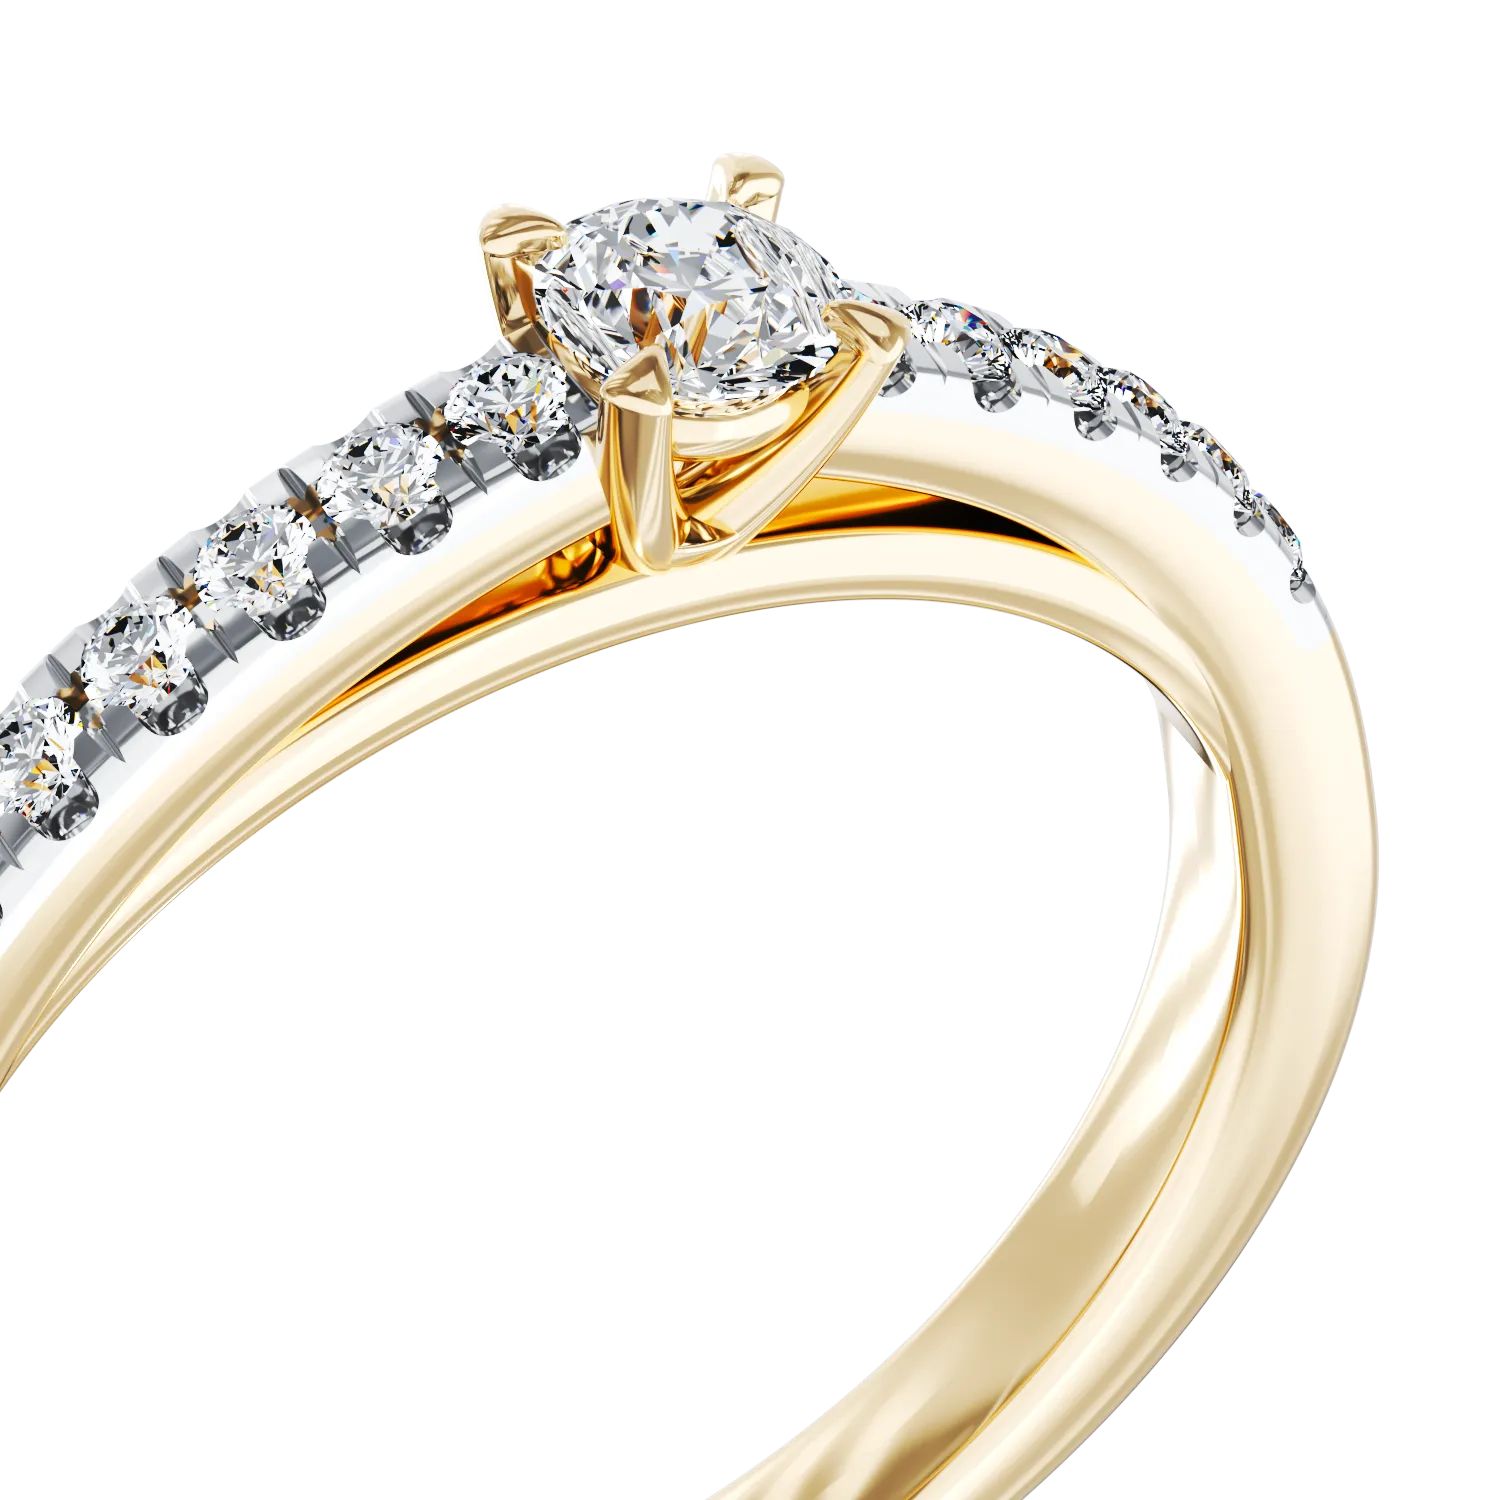 18K yellow gold engagement ring with 0.24ct diamond and 0.13ct diamonds